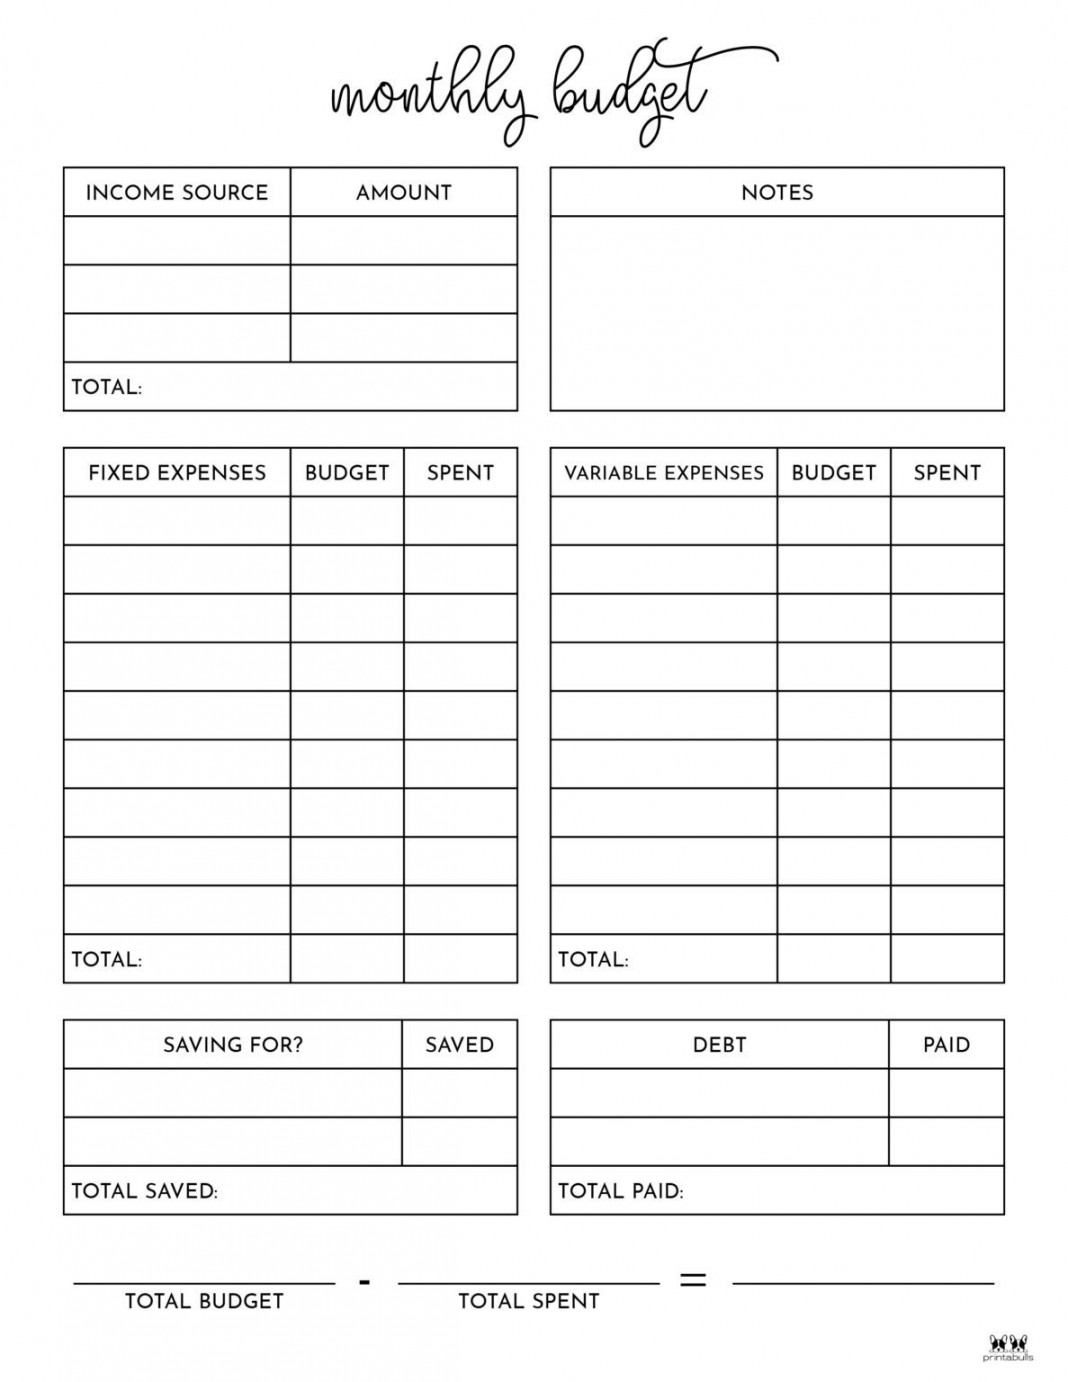 Monthly Budget Planners - FREE Printables Printabulls